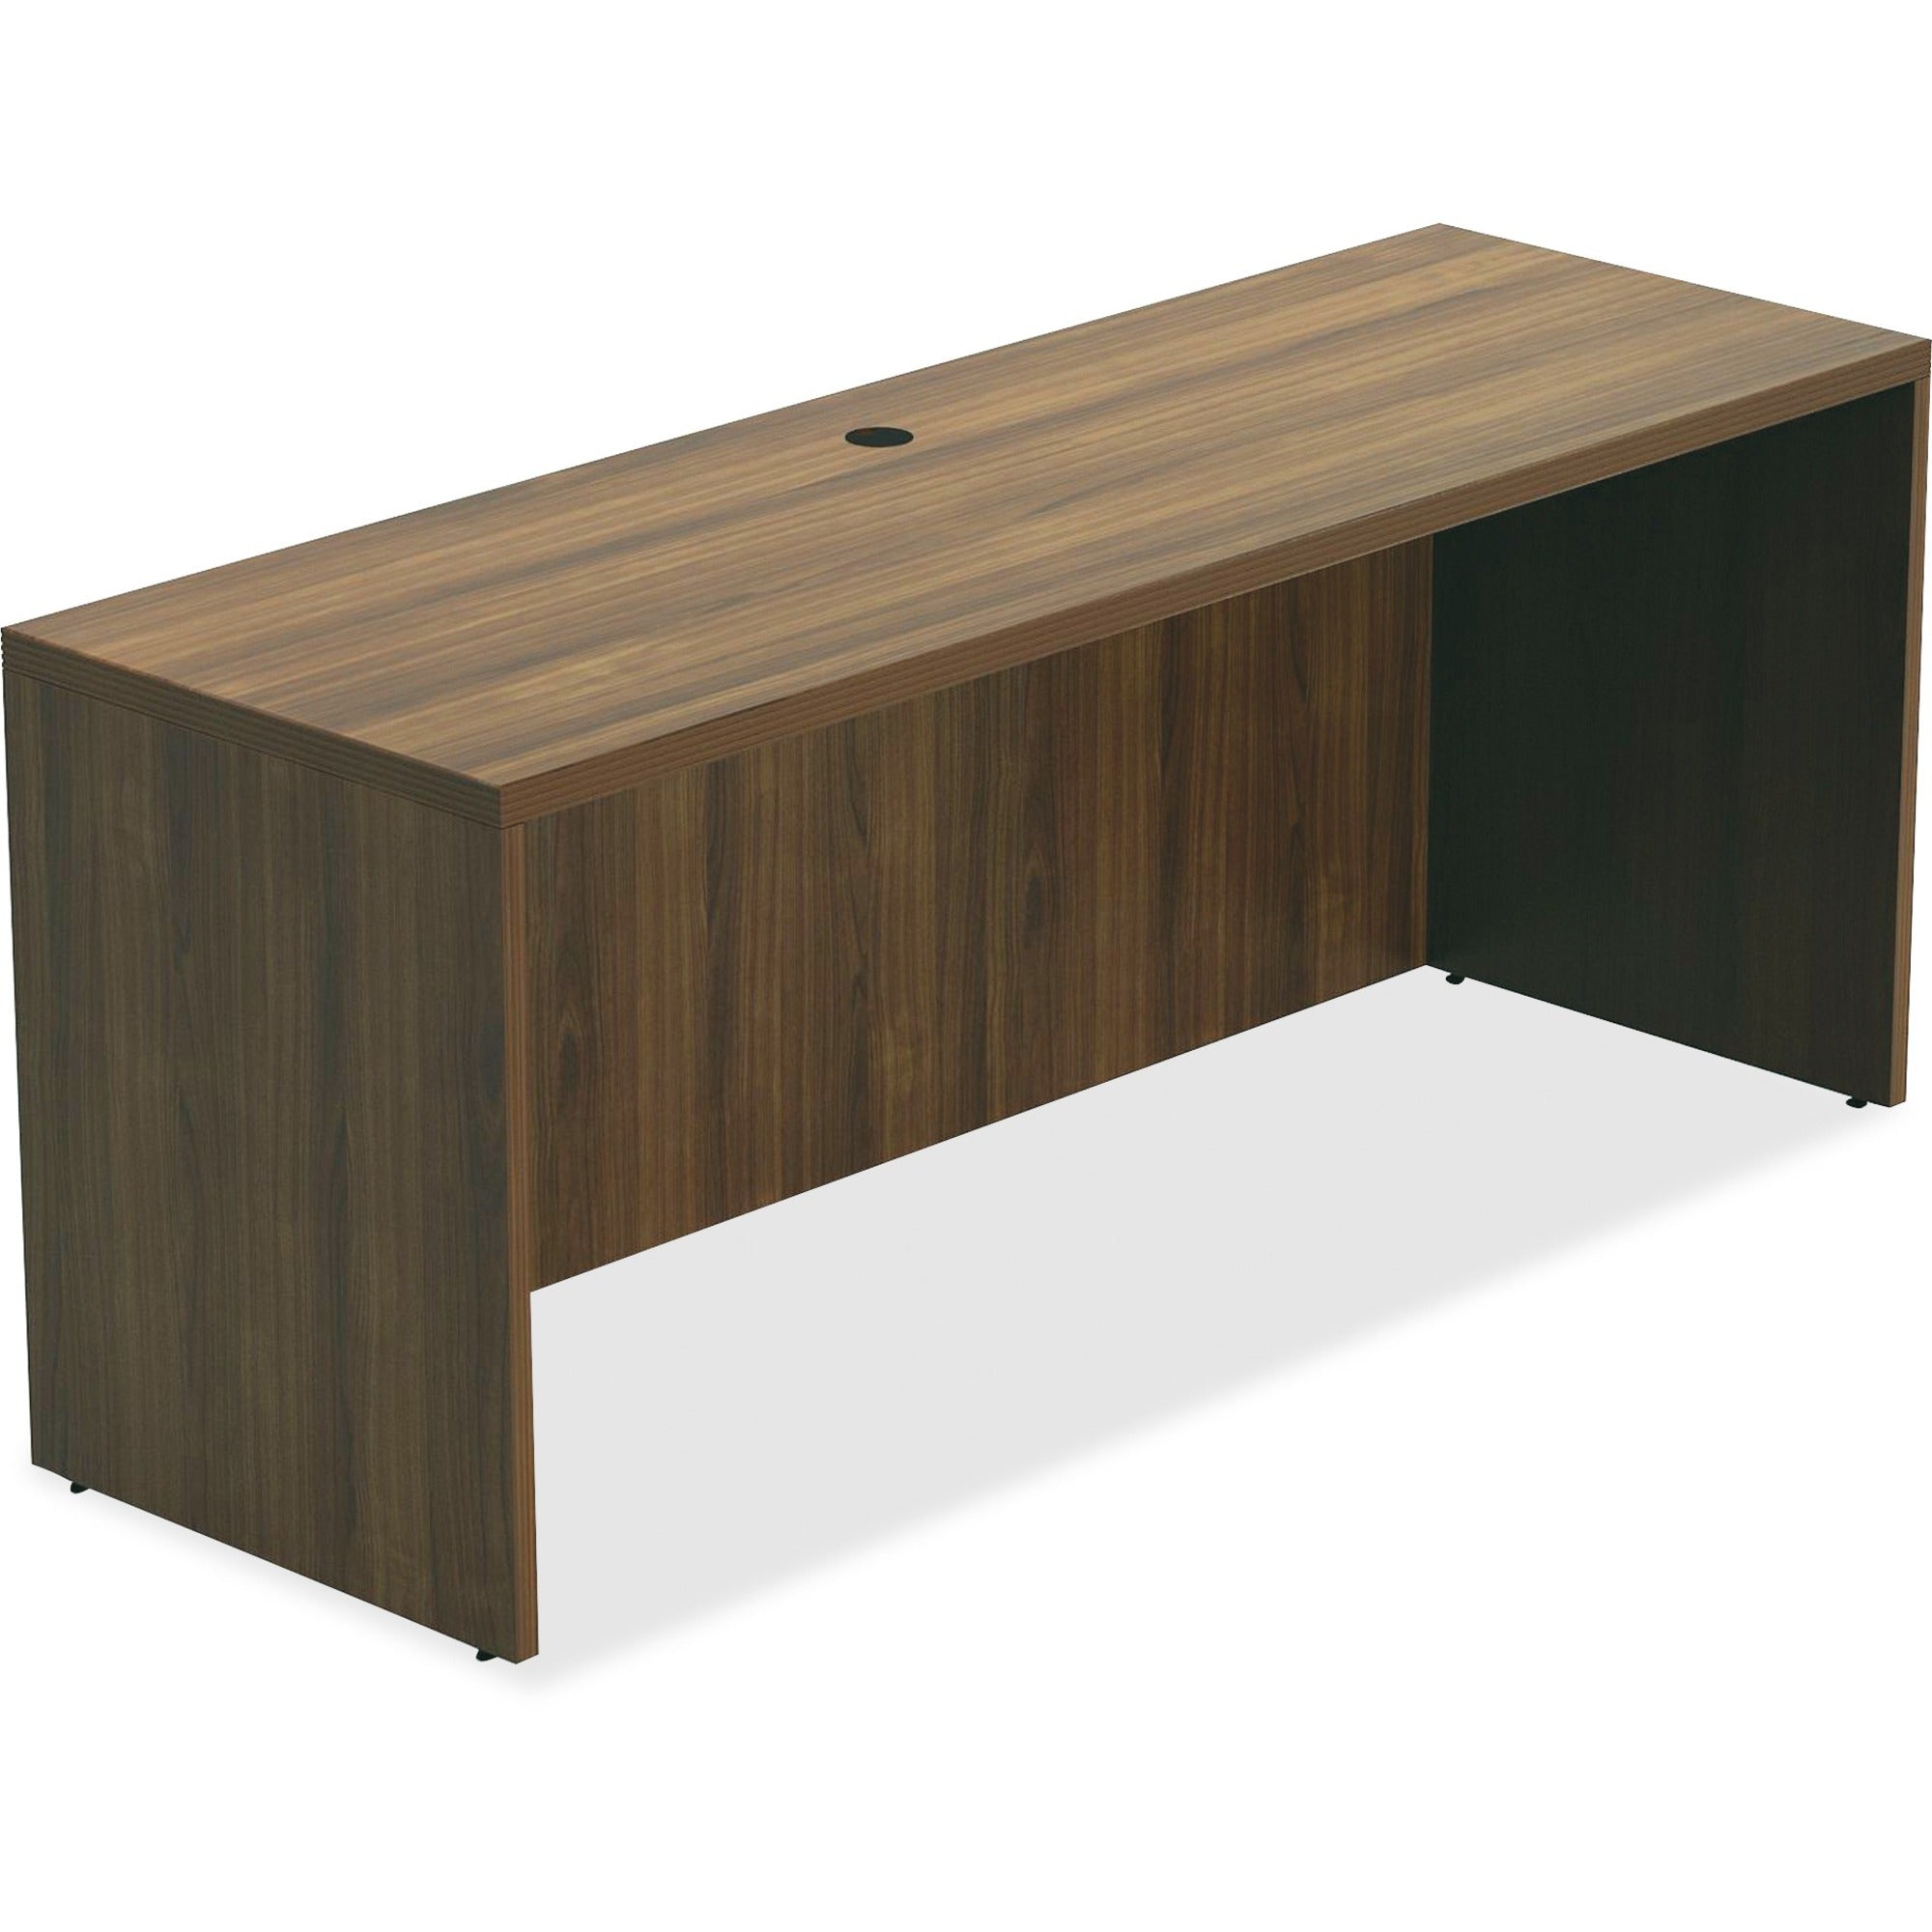 Lorell Chateau Series Credenza - 59" x 23.6"30" Credenza, 1.5" Top - Reeded Edge - Material: P2 Particleboard - Finish: Walnut, Laminate - Durable, Grommet, Cord Management, Modesty Panel - For Office - 